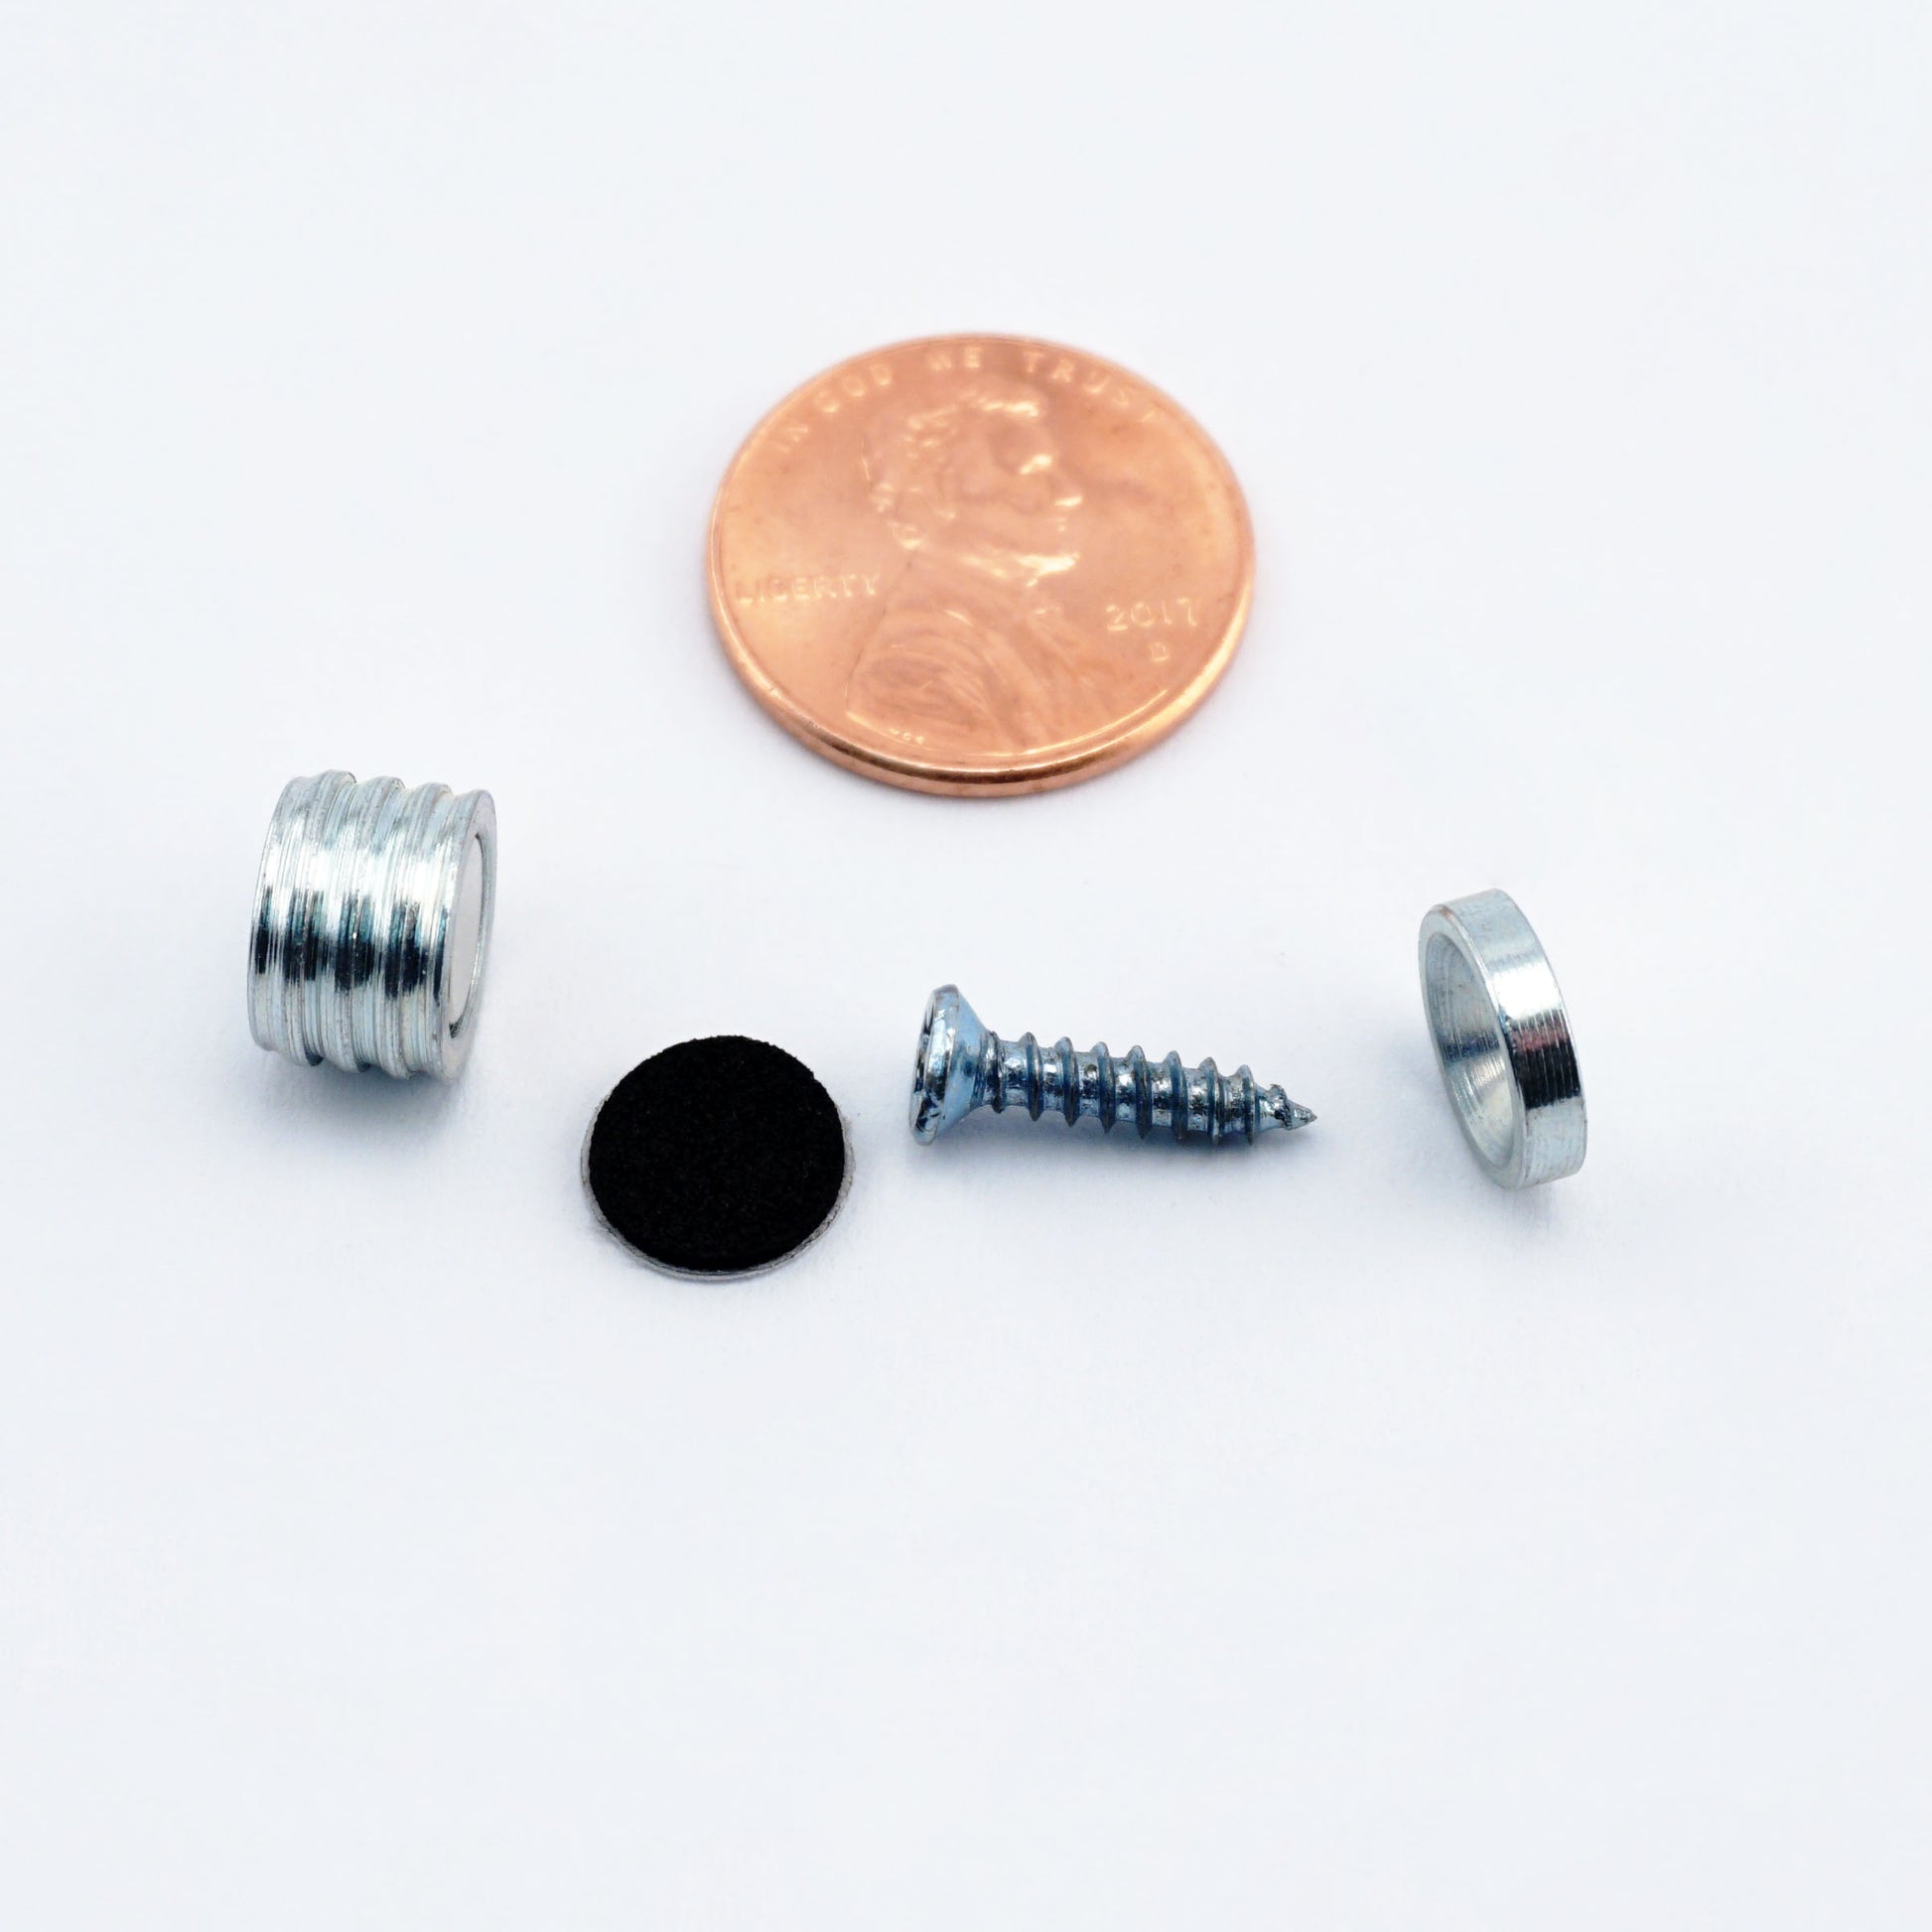 Load image into Gallery viewer, NMLKIT1 Neodymium Latch Magnet Kit (1 set) - Components compared to penny for size reference